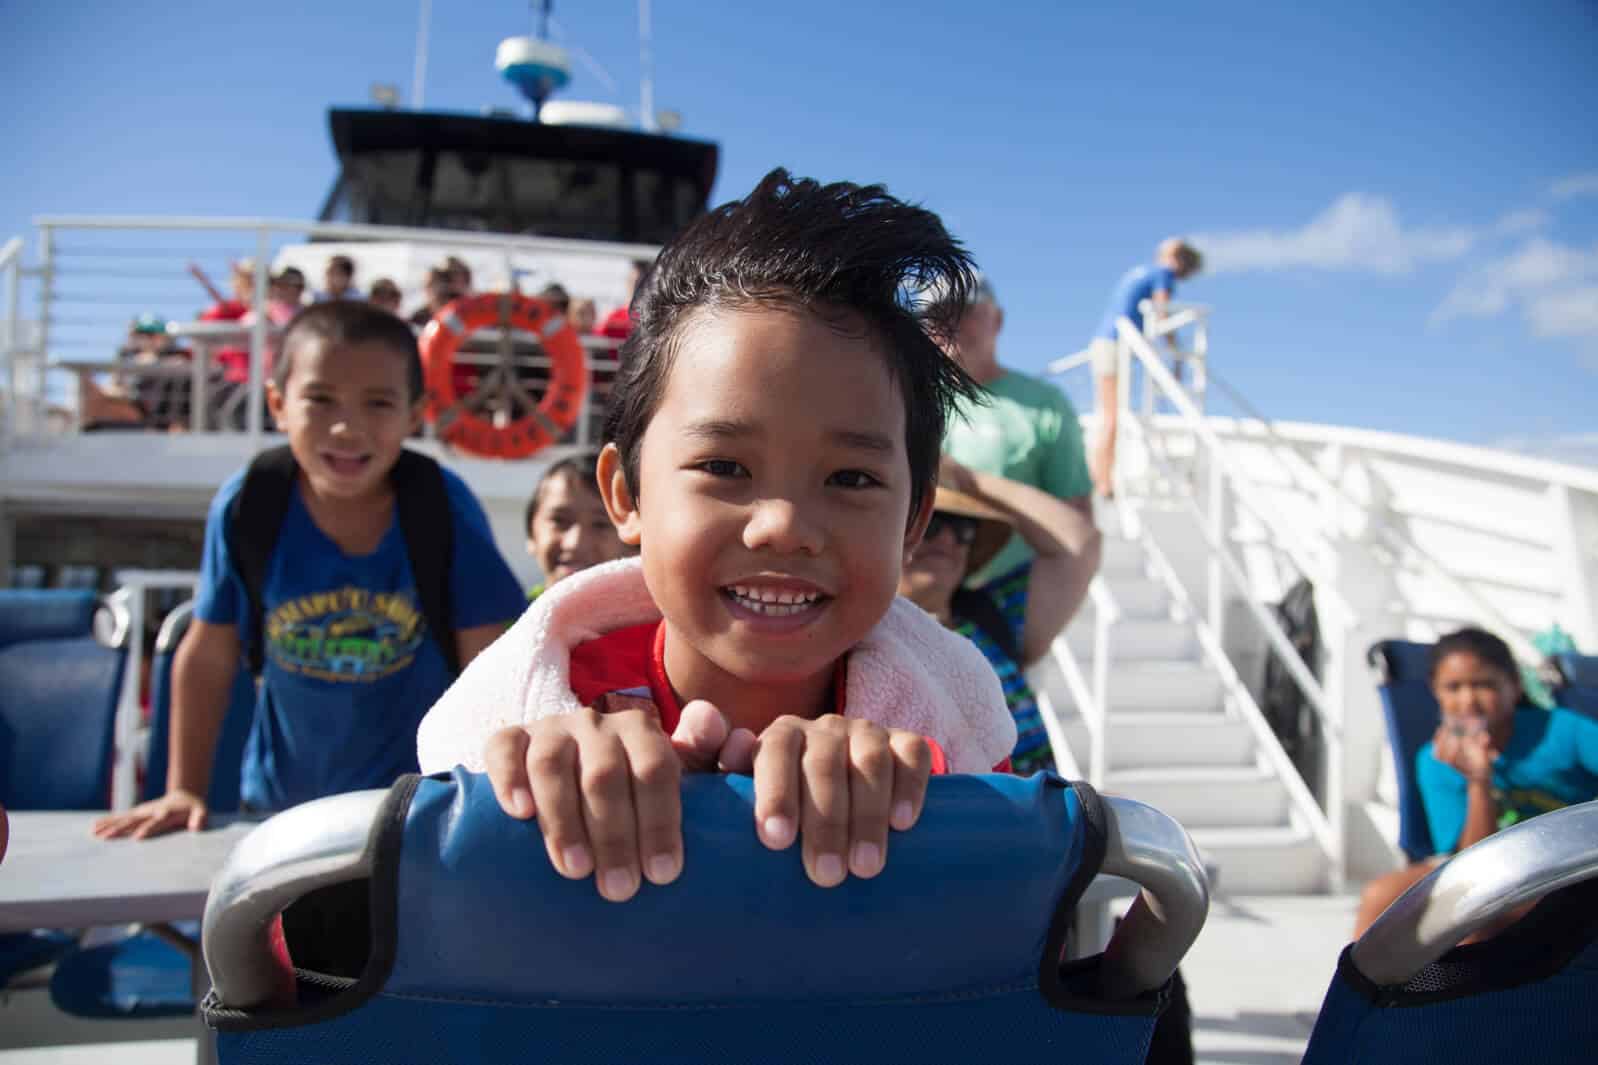 Child smiling while on a whalewatching field trip